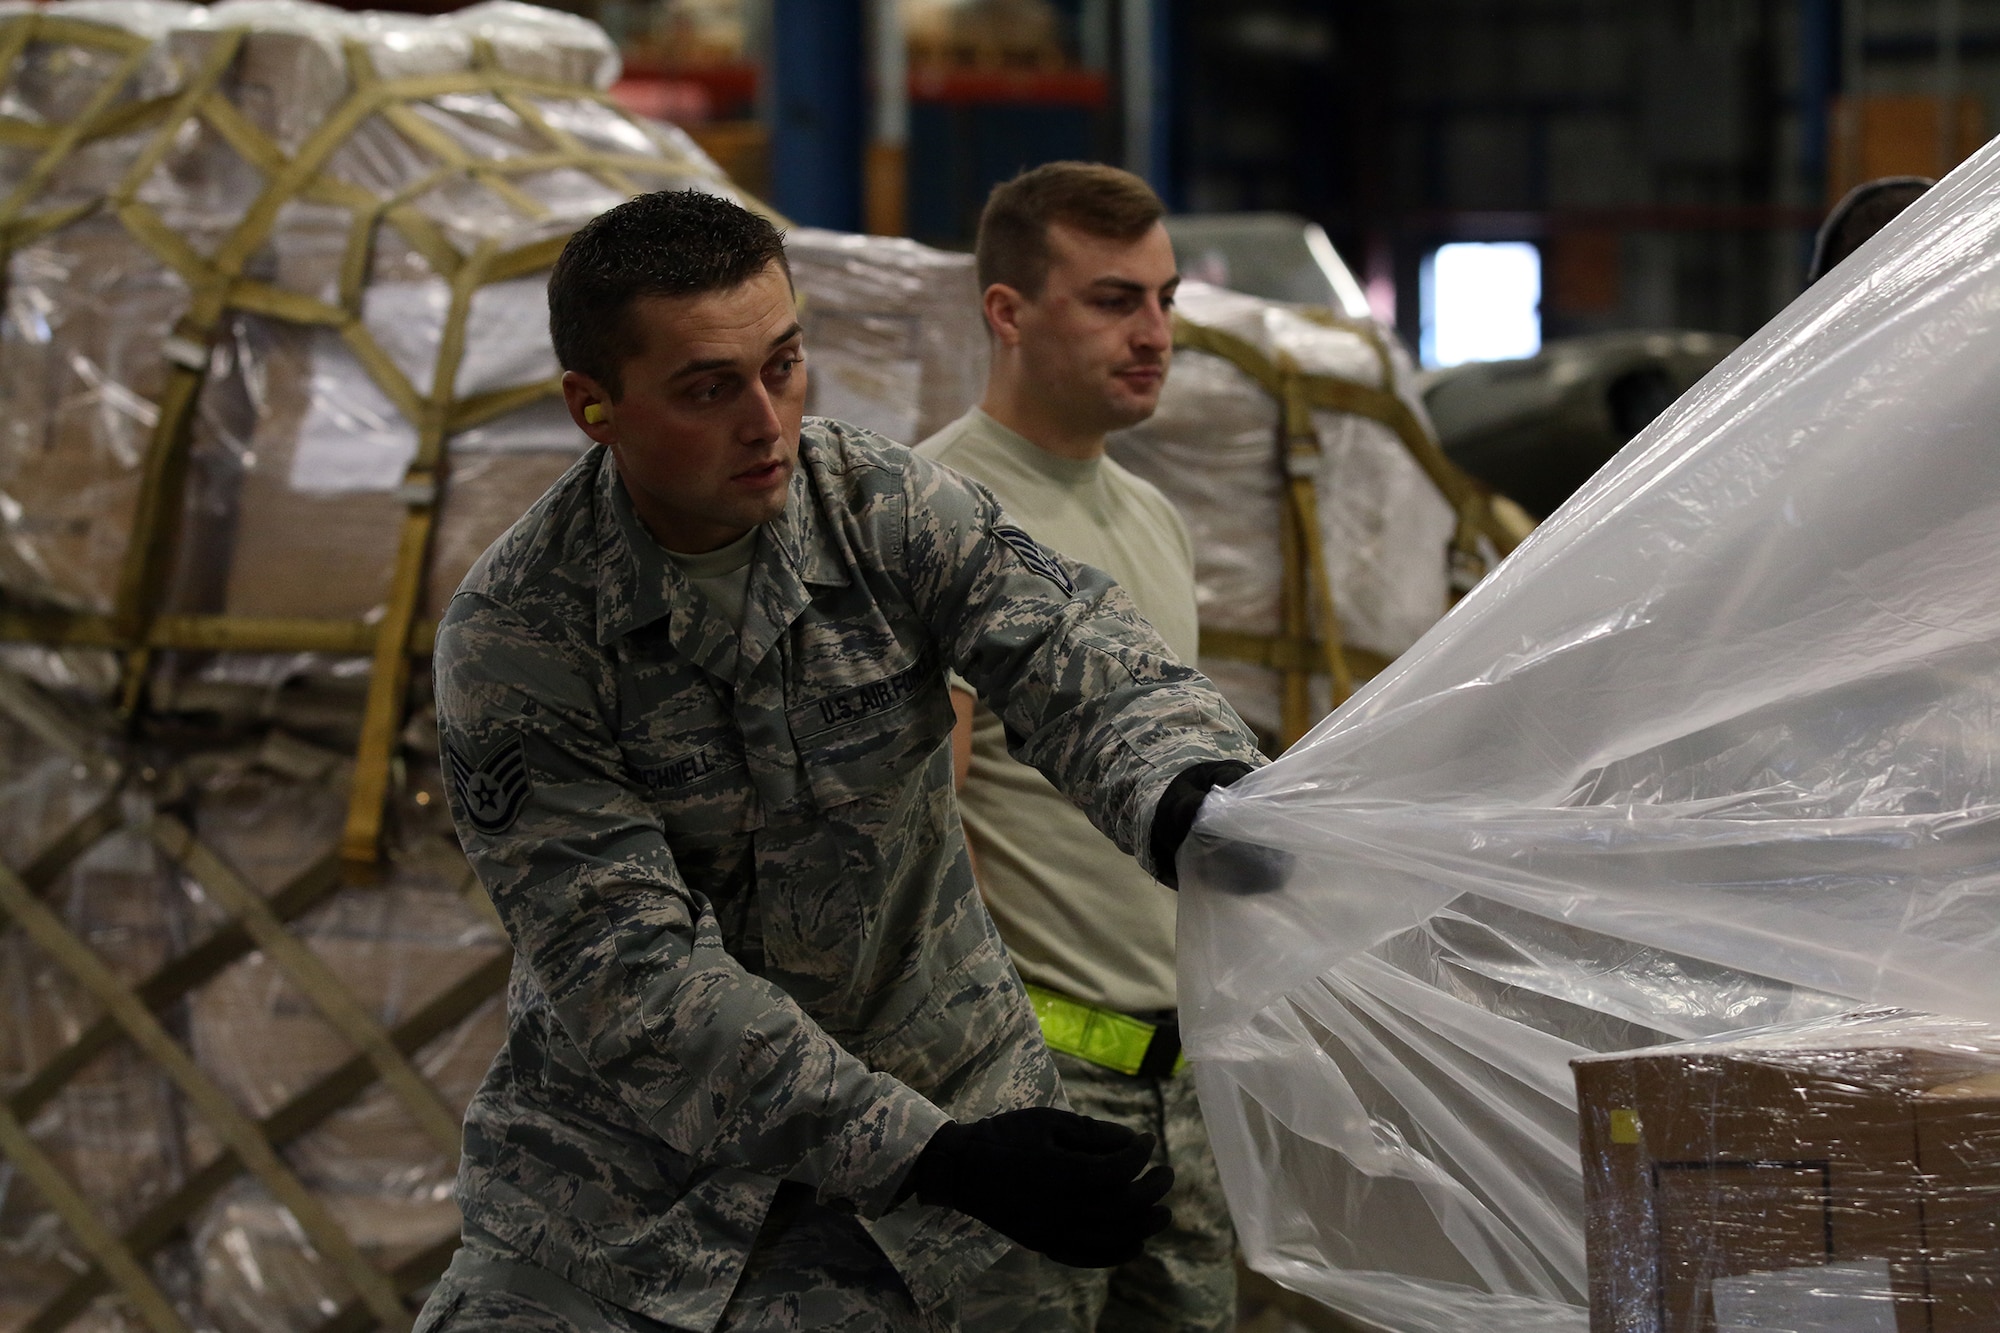 WRIGHT-PATTERSON AIR FORCE BASE, Ohio – Staff Sgt. Andrew Schnell, 87th Aerial Port Squadron cargo processor, applies a plastic covering onto secured pallets simulated for transportation by C-17 Globemaster III during training held on the Nov. 6, 2015 unit training assembly. (U.S. Air Force photo /Tech. Sgt. Patrick O’Reilly))